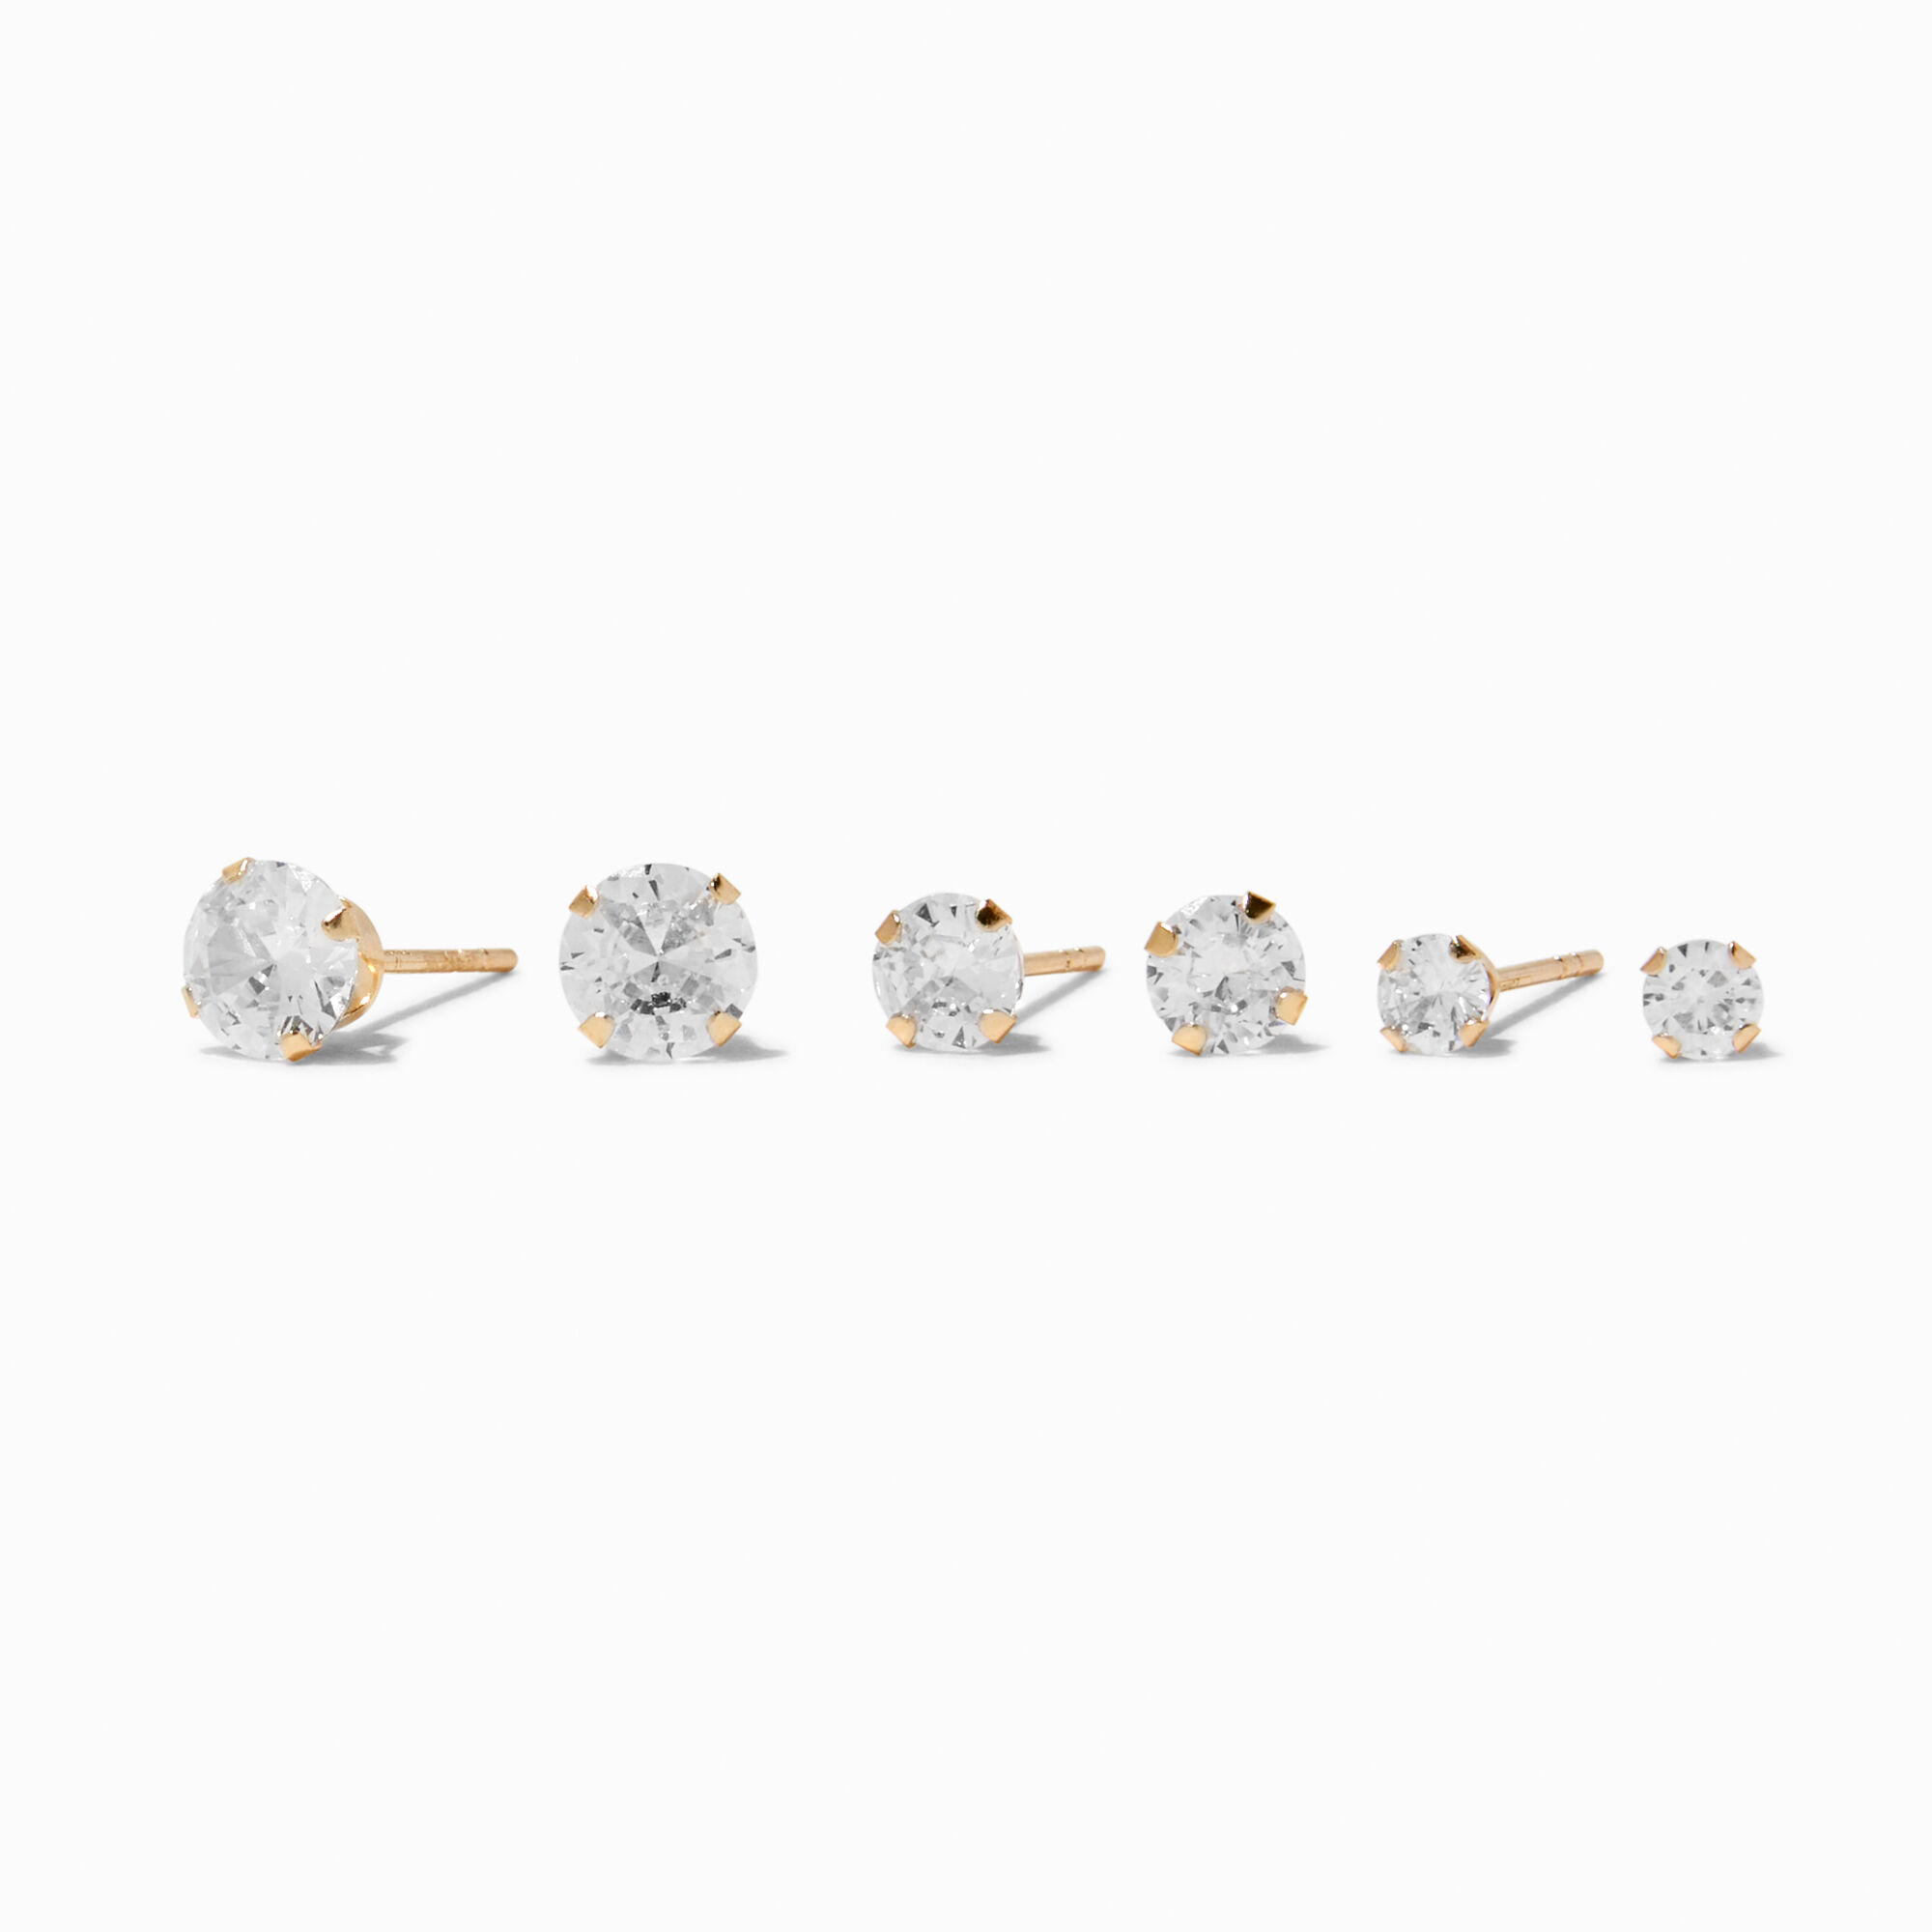 Gold Star Stud  Cuff Earrings  6 Pack  Claires US